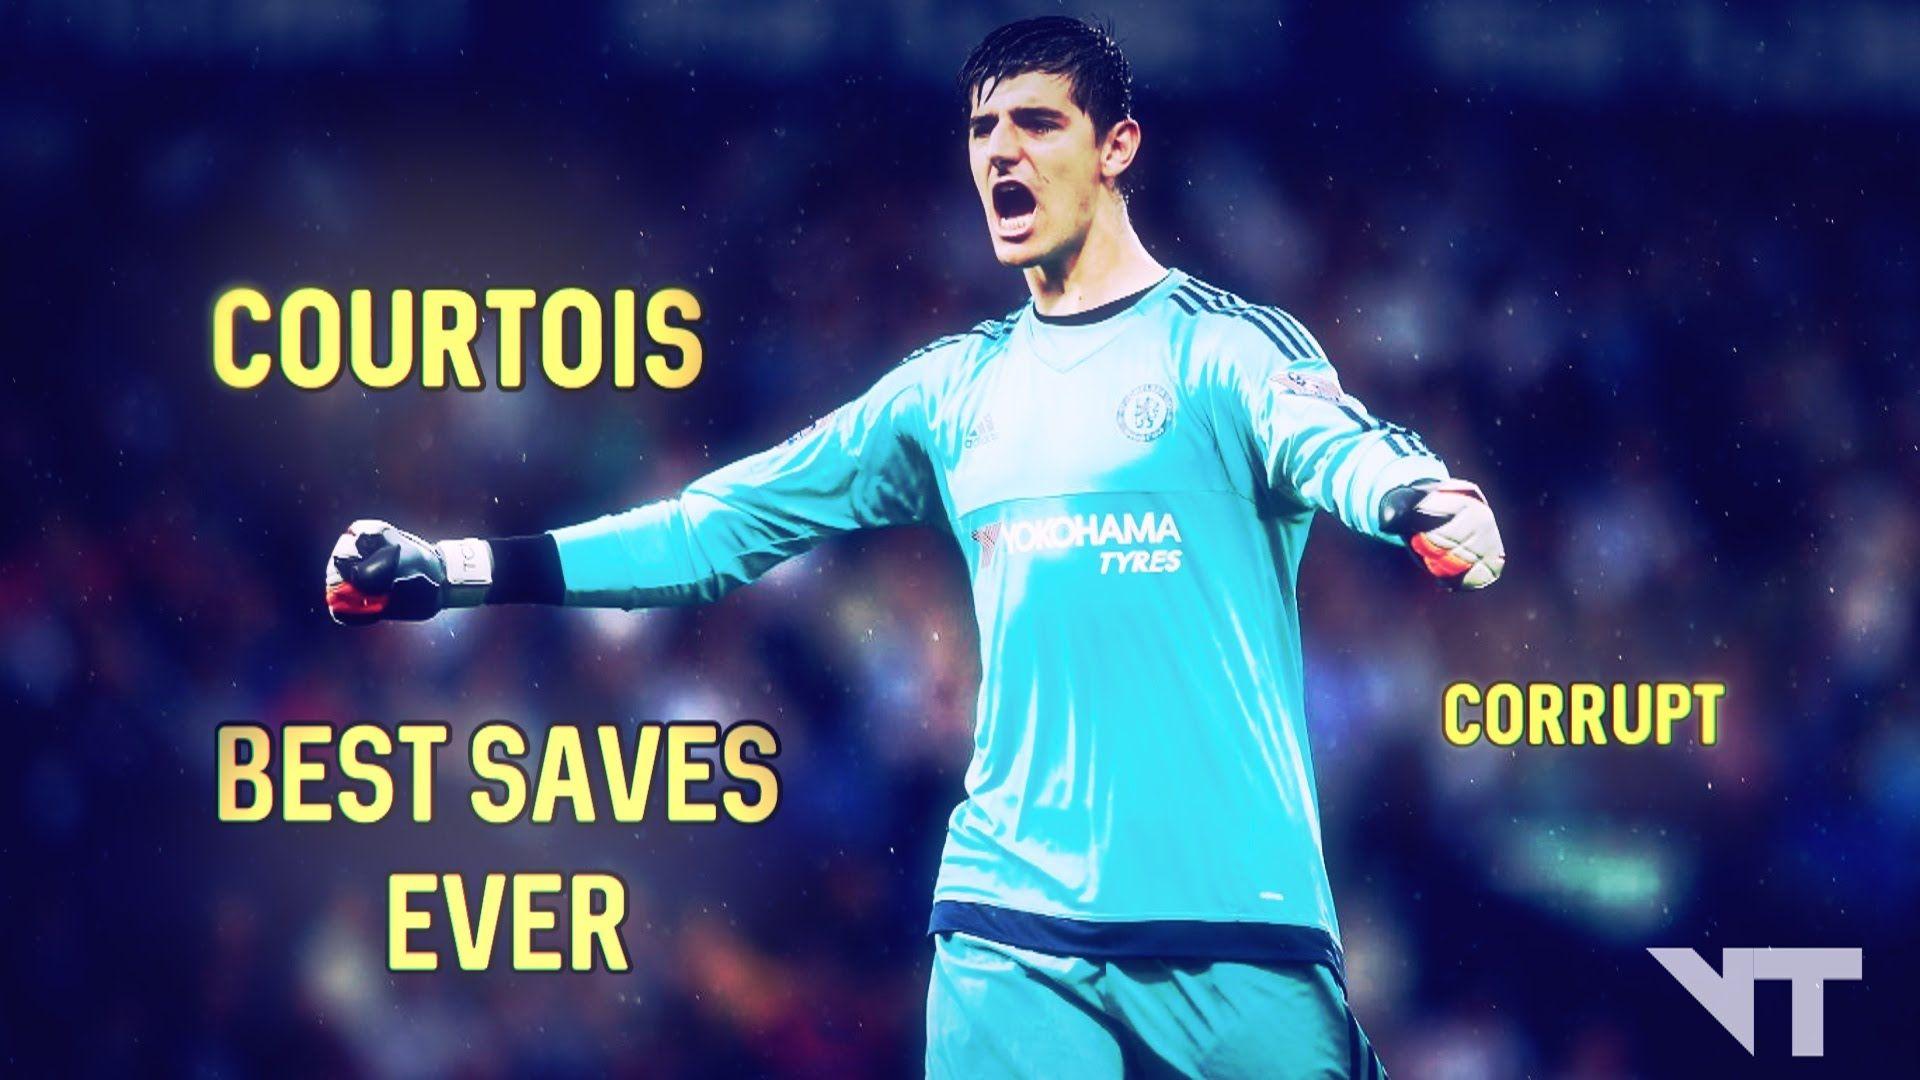 Thibaut Courtois Best Saves Ever At Chelsea and Atlético Madrid